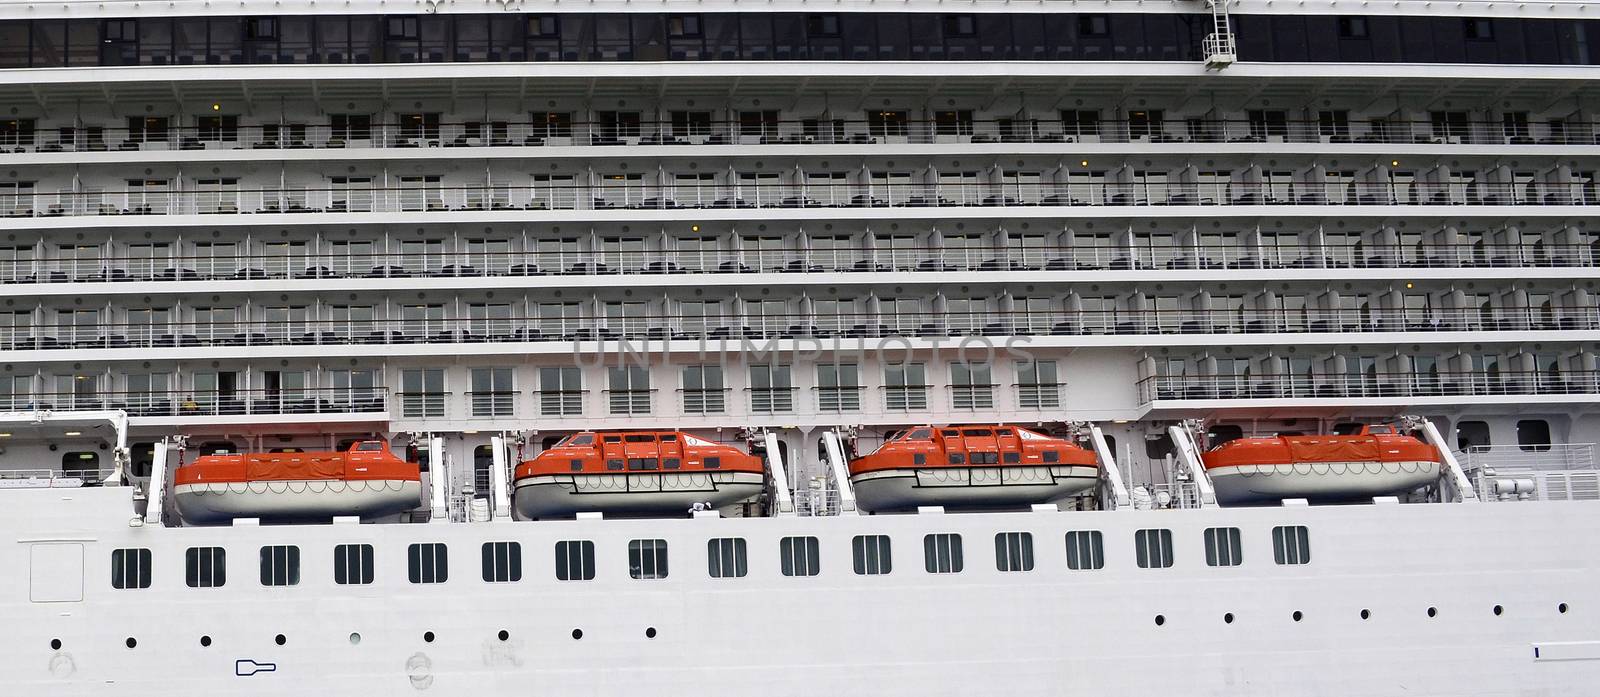 Side view of a cruise ship with lifeboats and cabins balcony by hibrida13